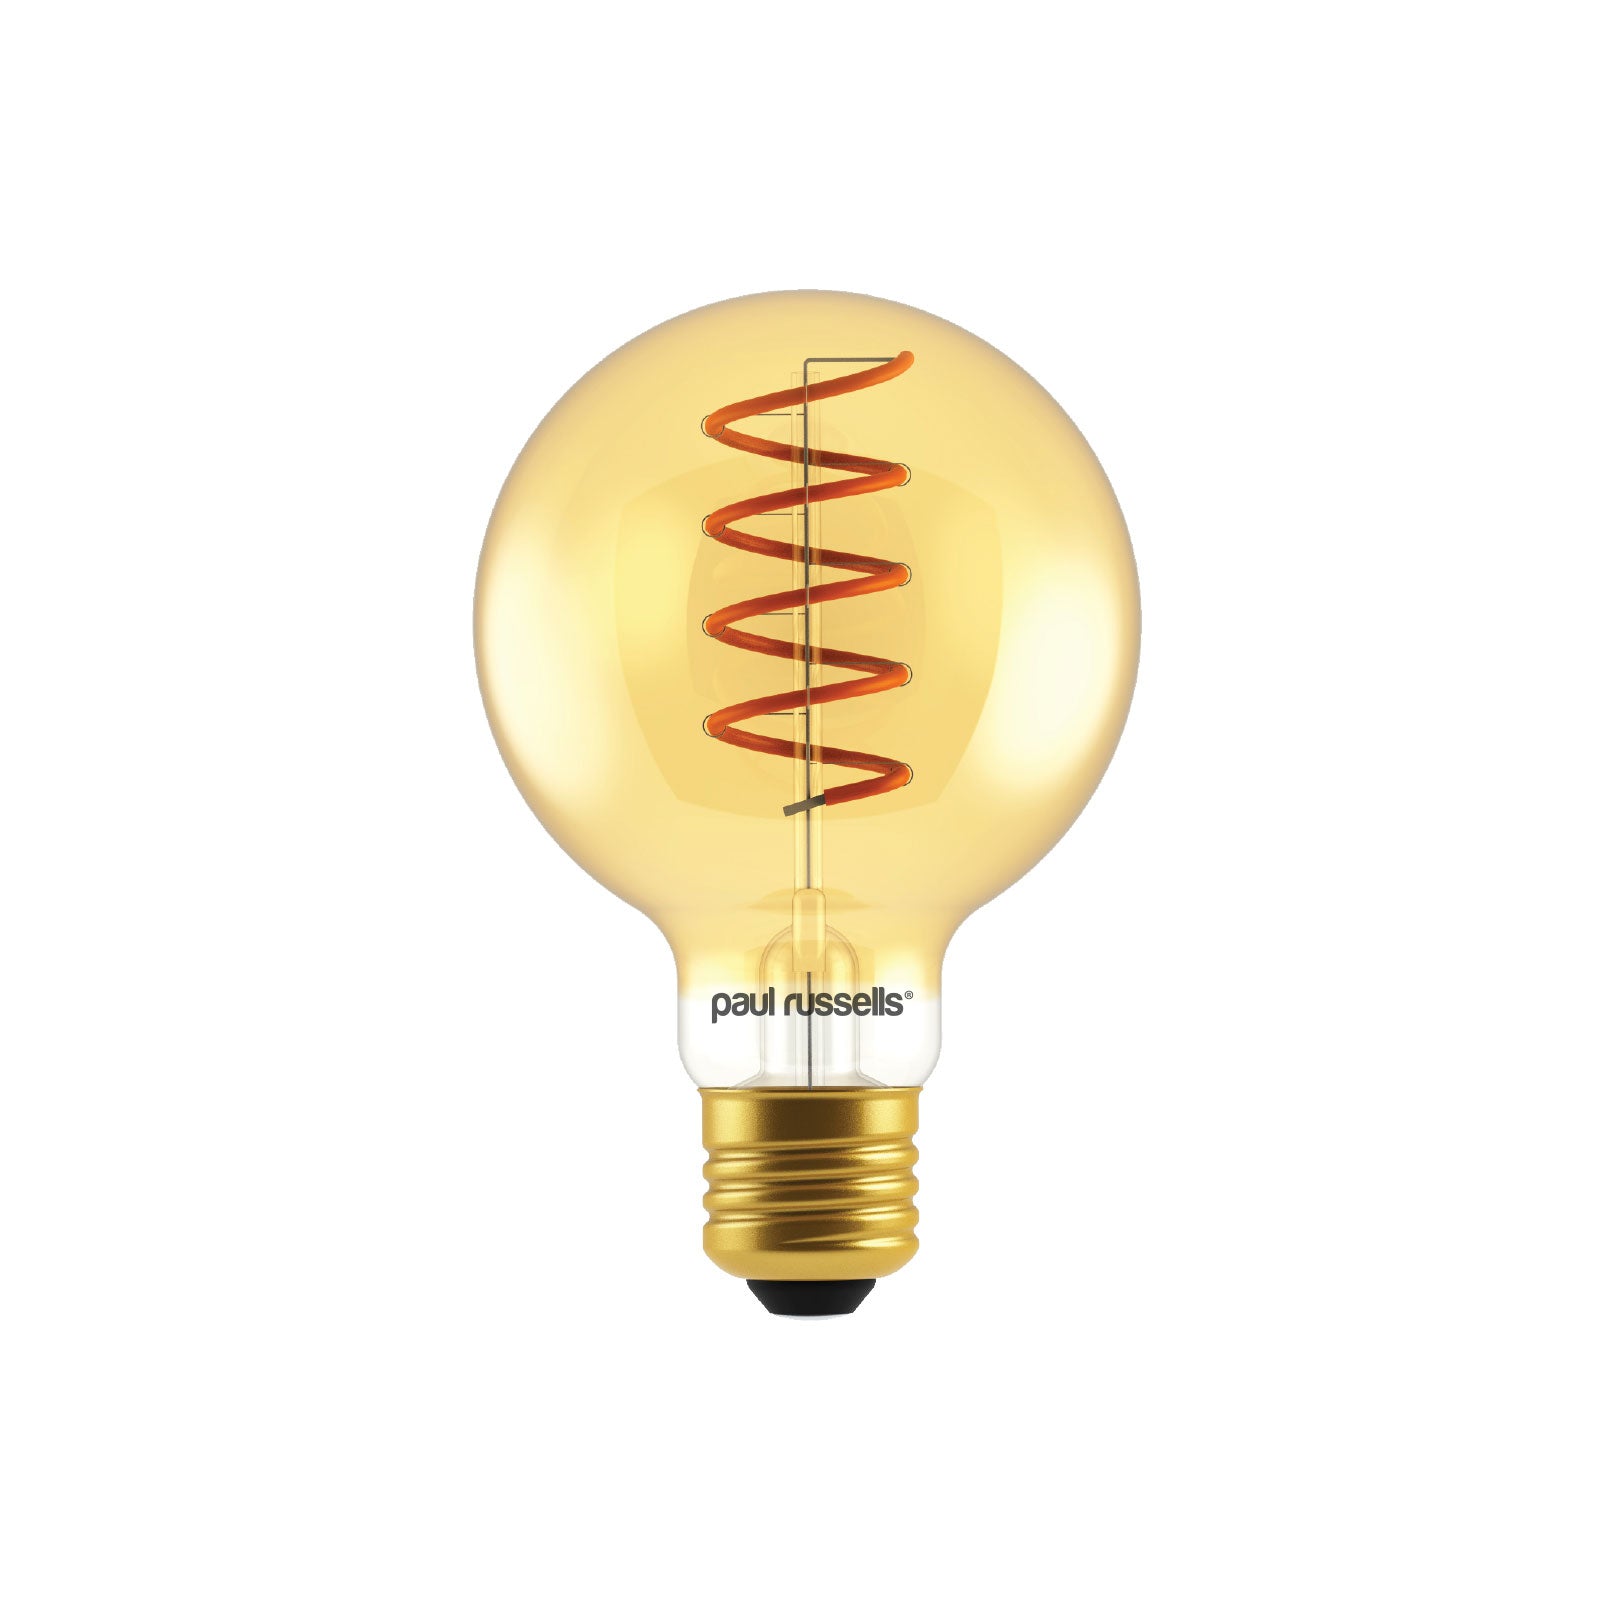 LED Filament Spiral G80 4W=25w Extra Warm White (AMBER) ES E27 Edison –  paul russells